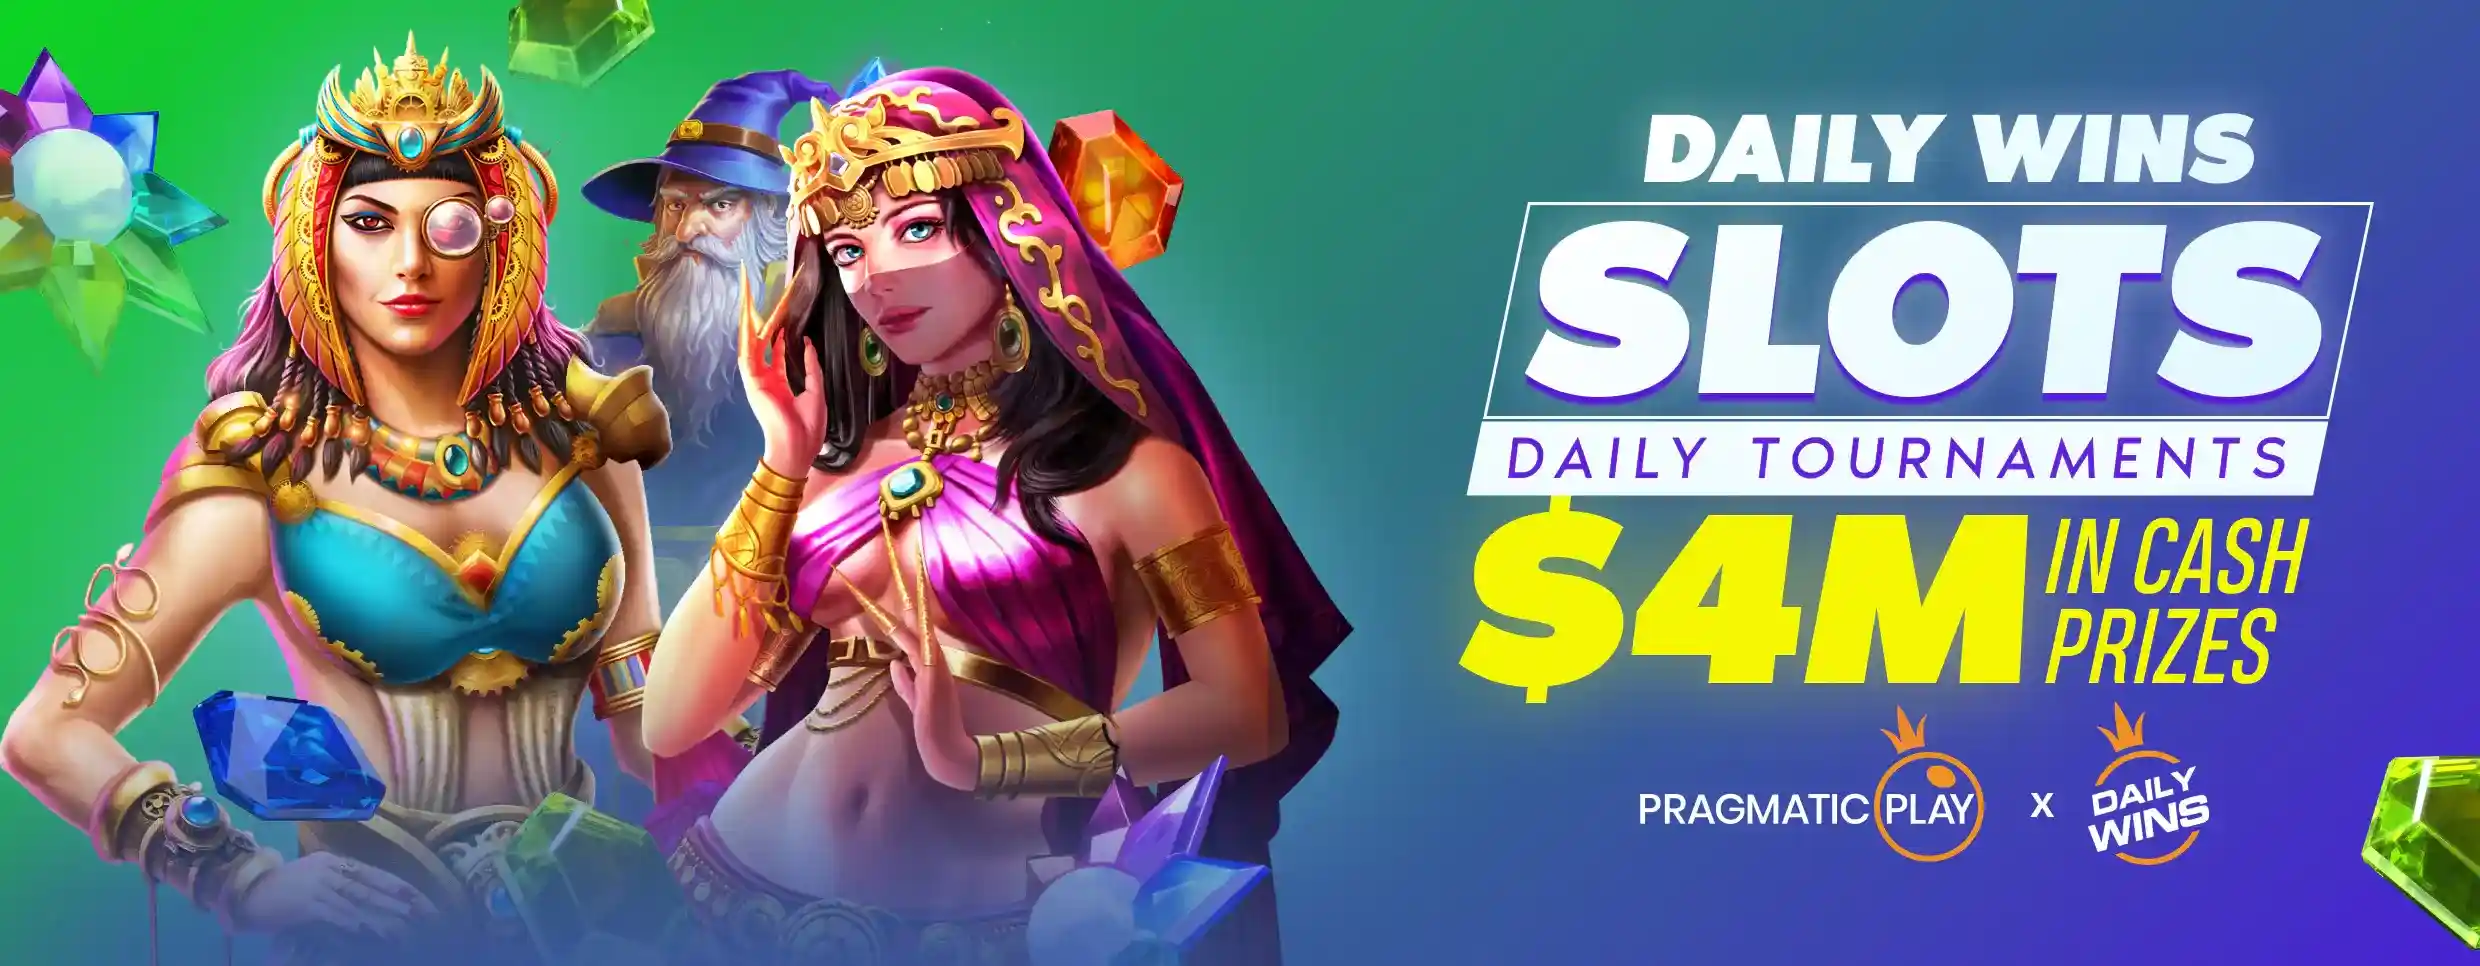 Daily Wins Slots Level 11